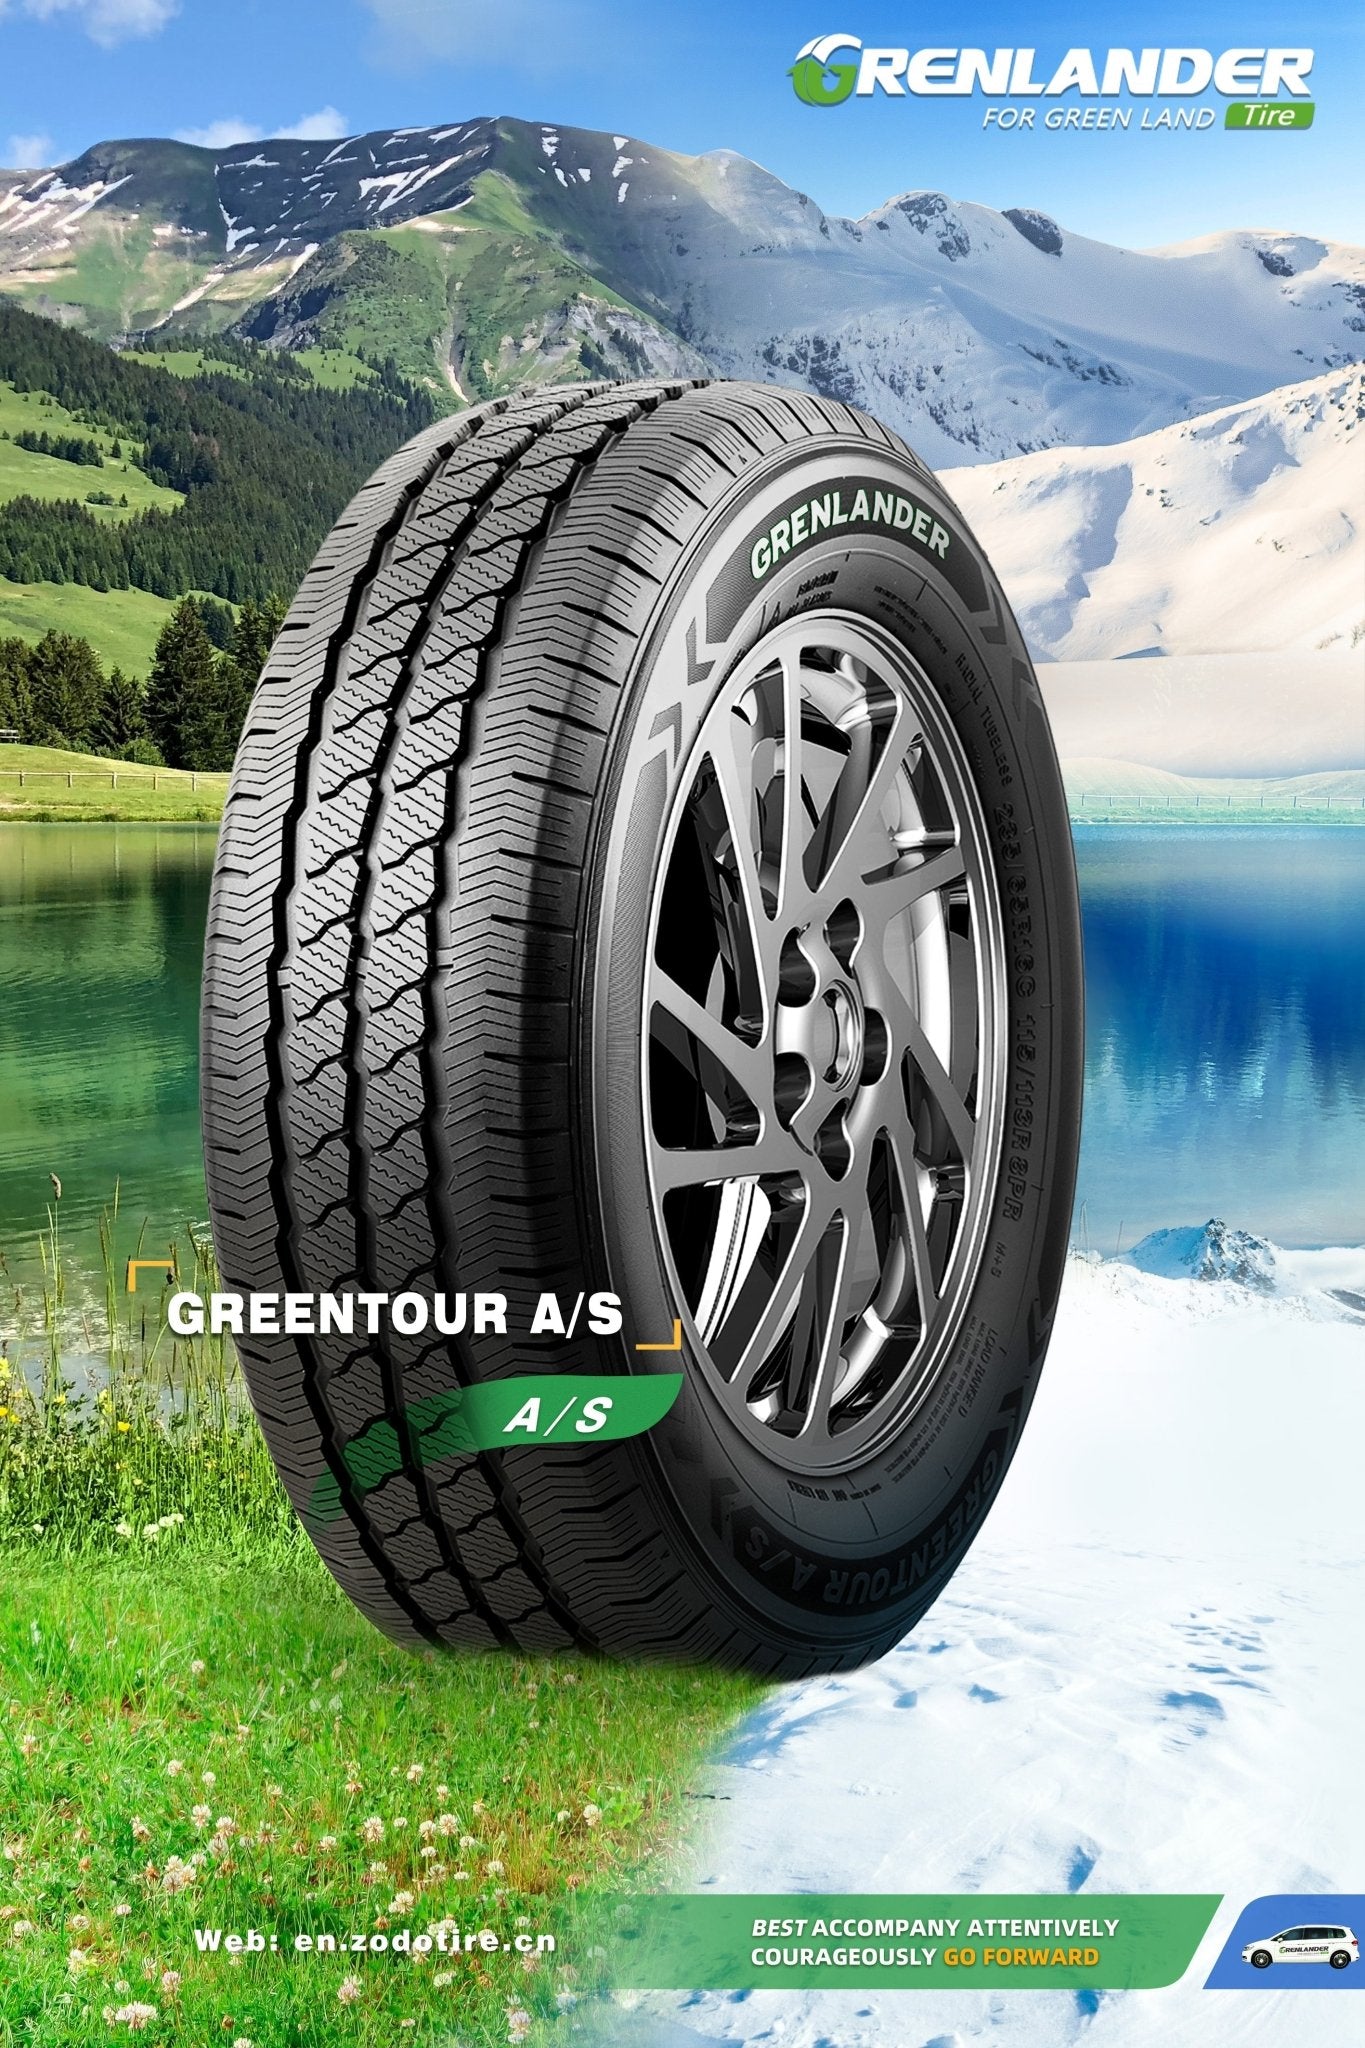 235/65R16 GRENLANDER GREENTOUR A/S COMMERCIAL - Toee Tire